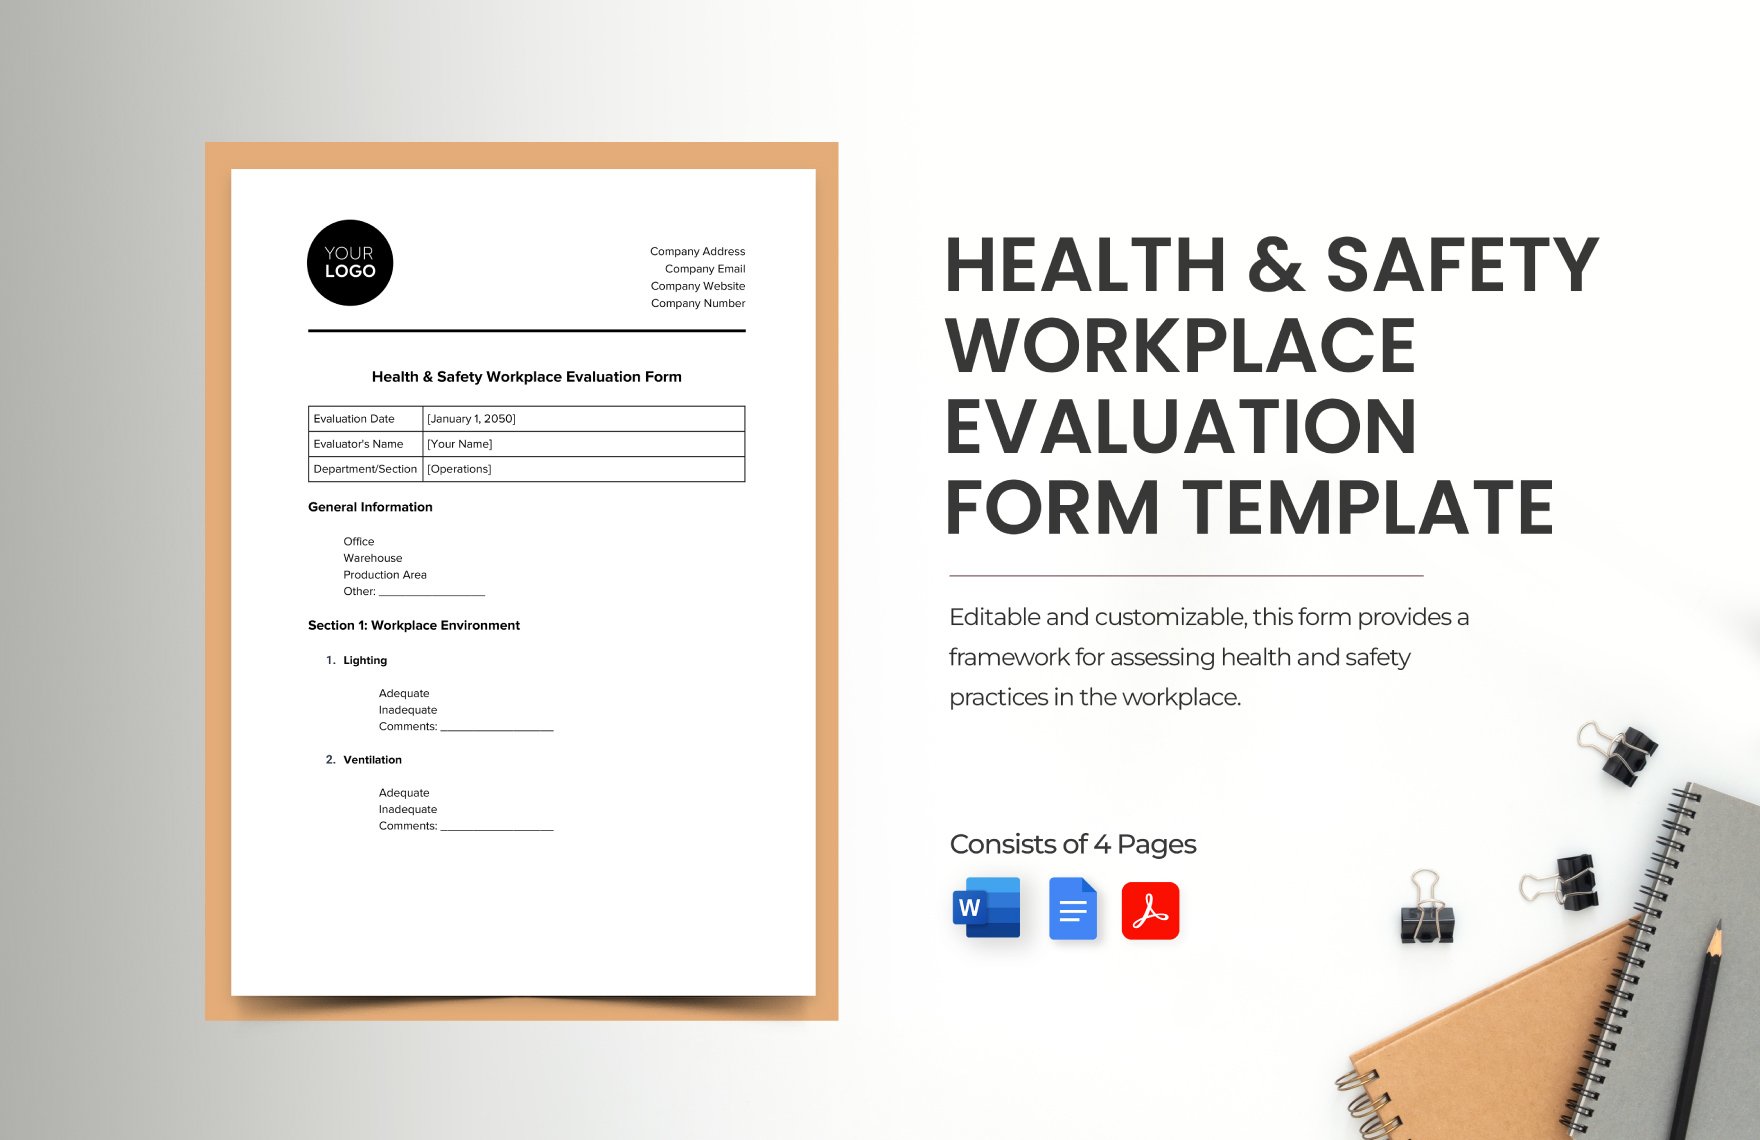 Health & Safety Workplace Evaluation Form Template